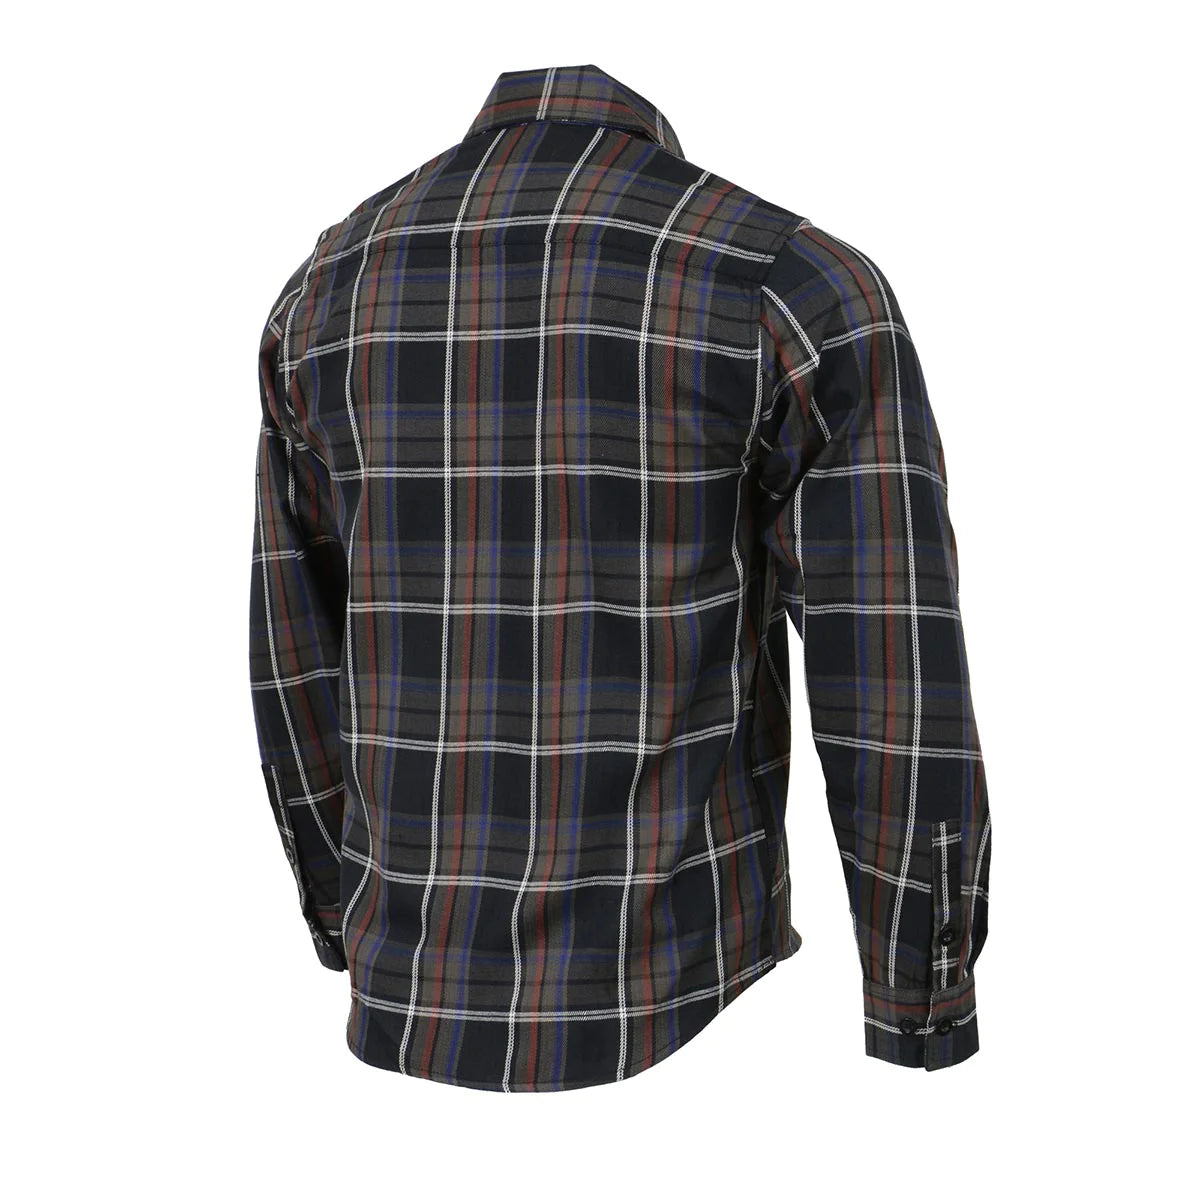 Men's Black, Purple, Grey and Red Long Sleeve Cotton Flannel Shirt